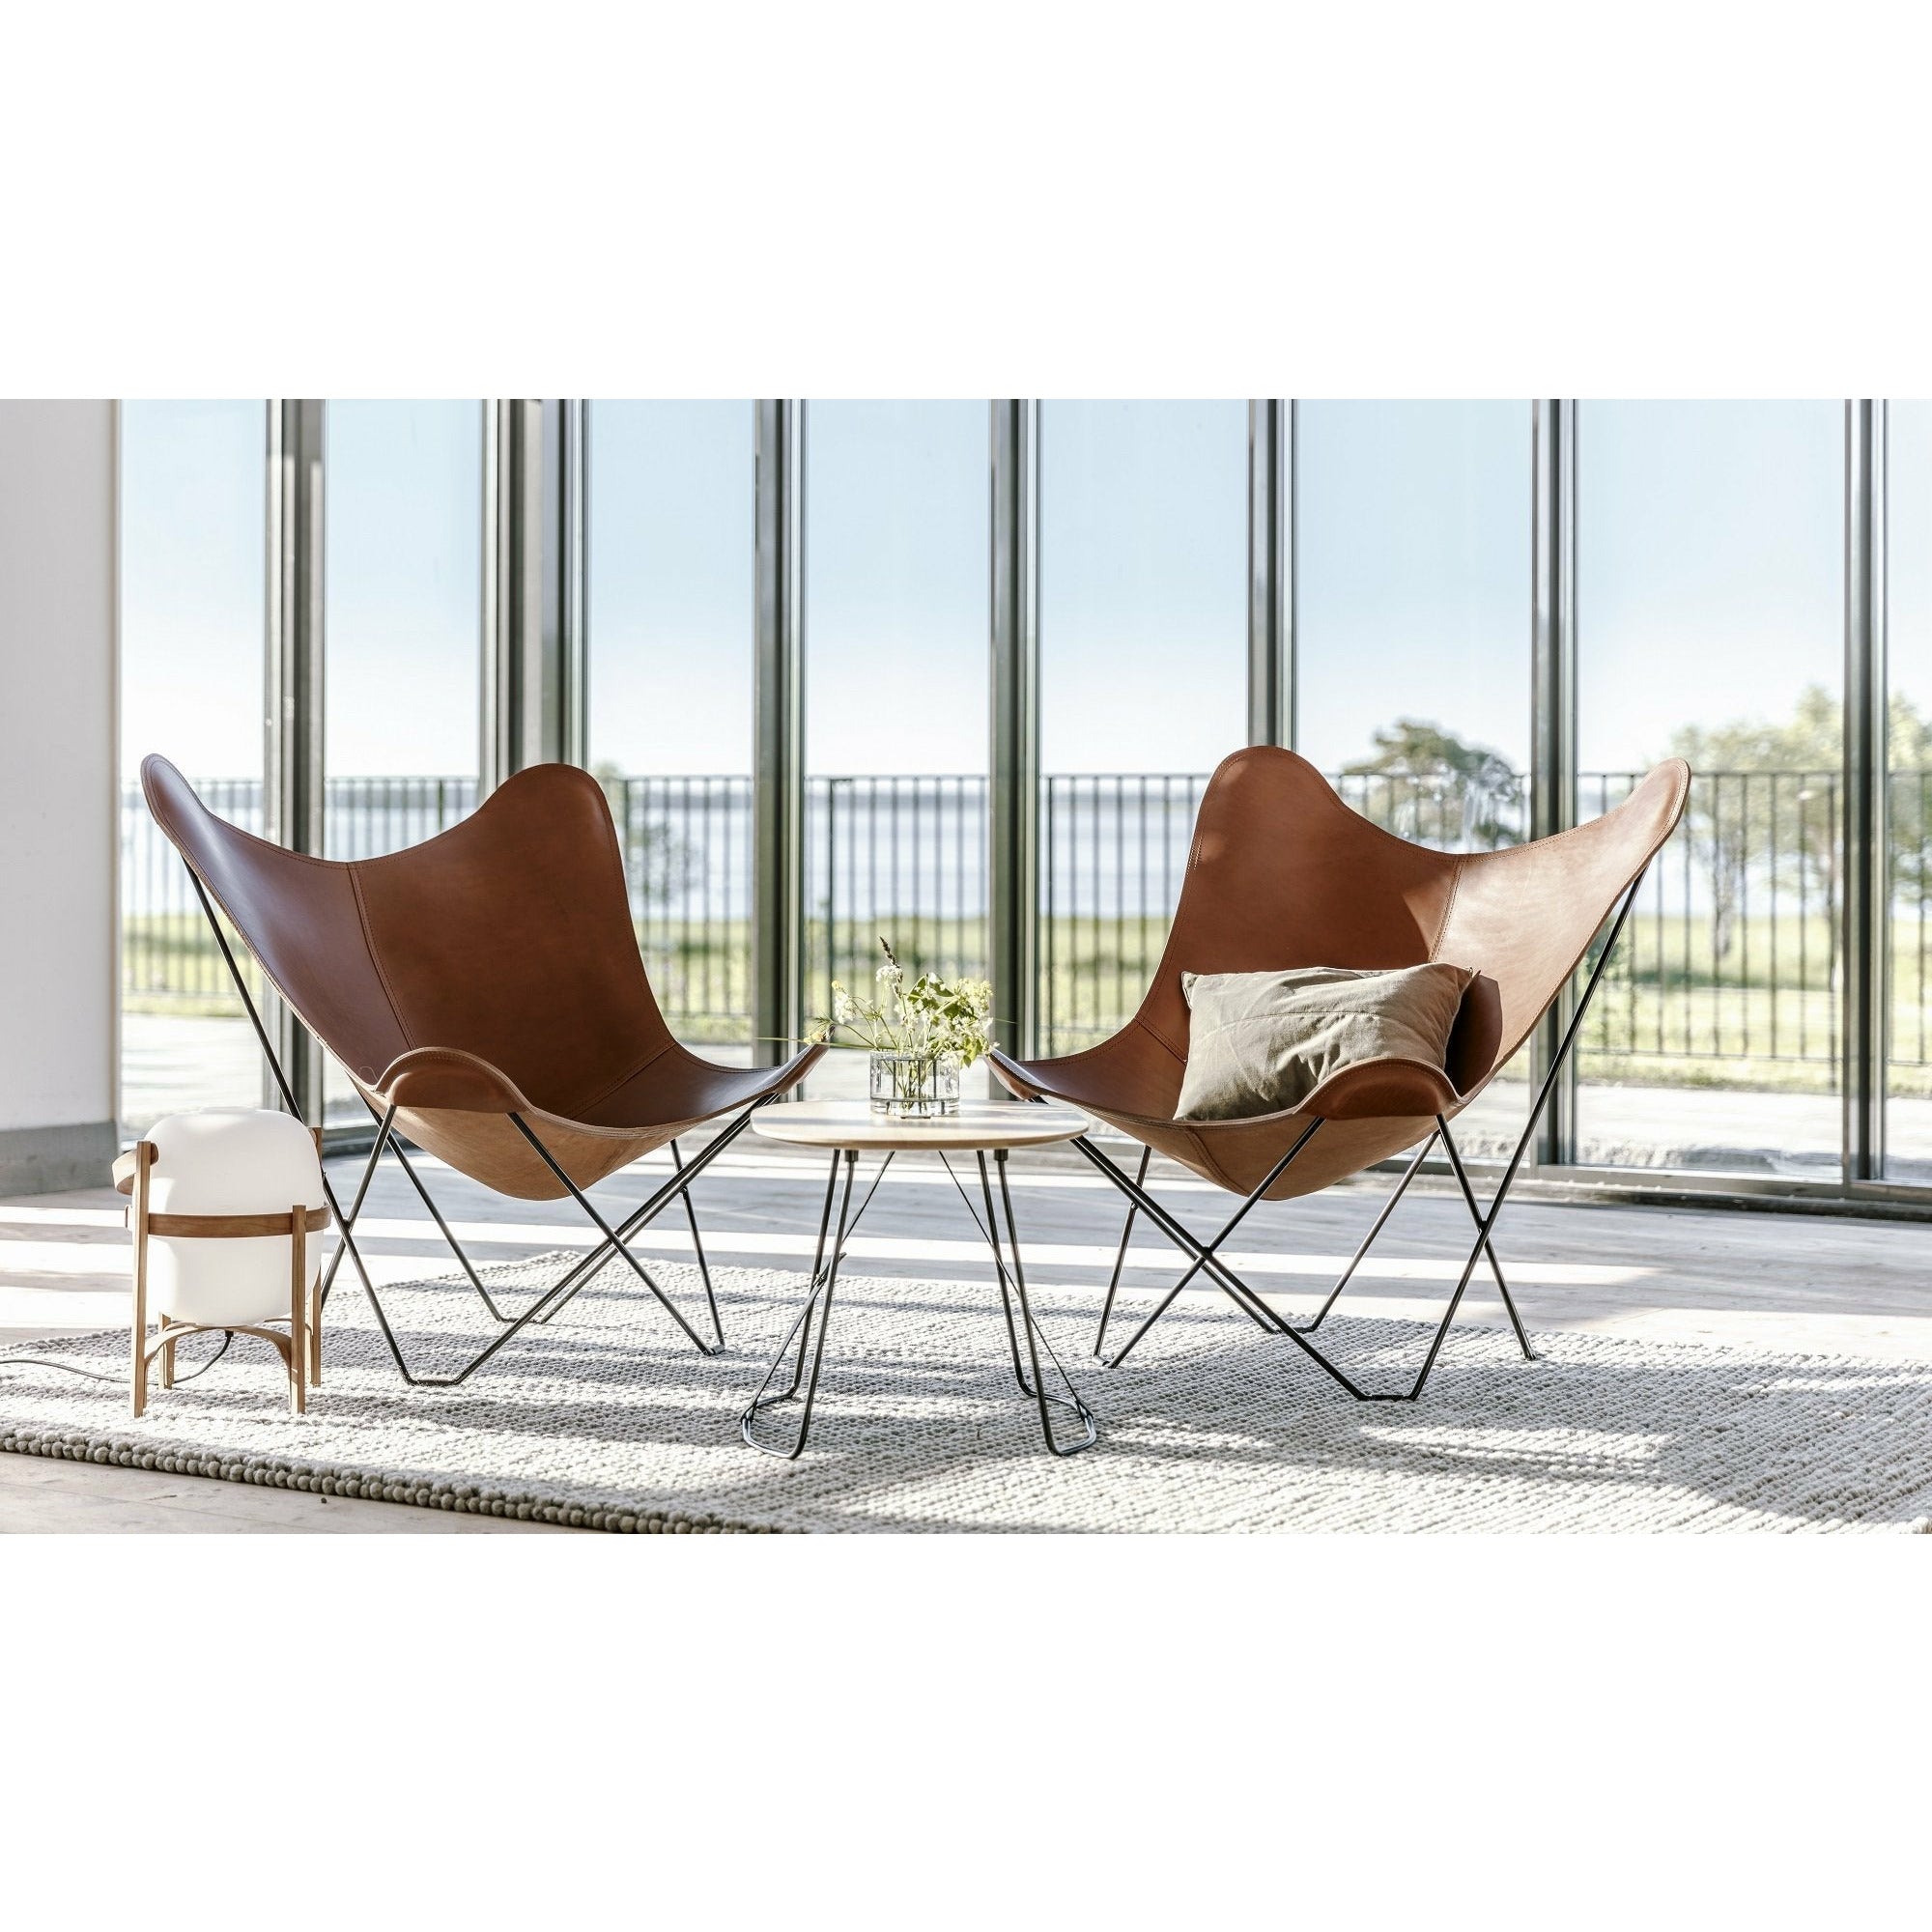 Cuero Pampa Mariposa Butterfly Chair, Nature Brute/Chrome